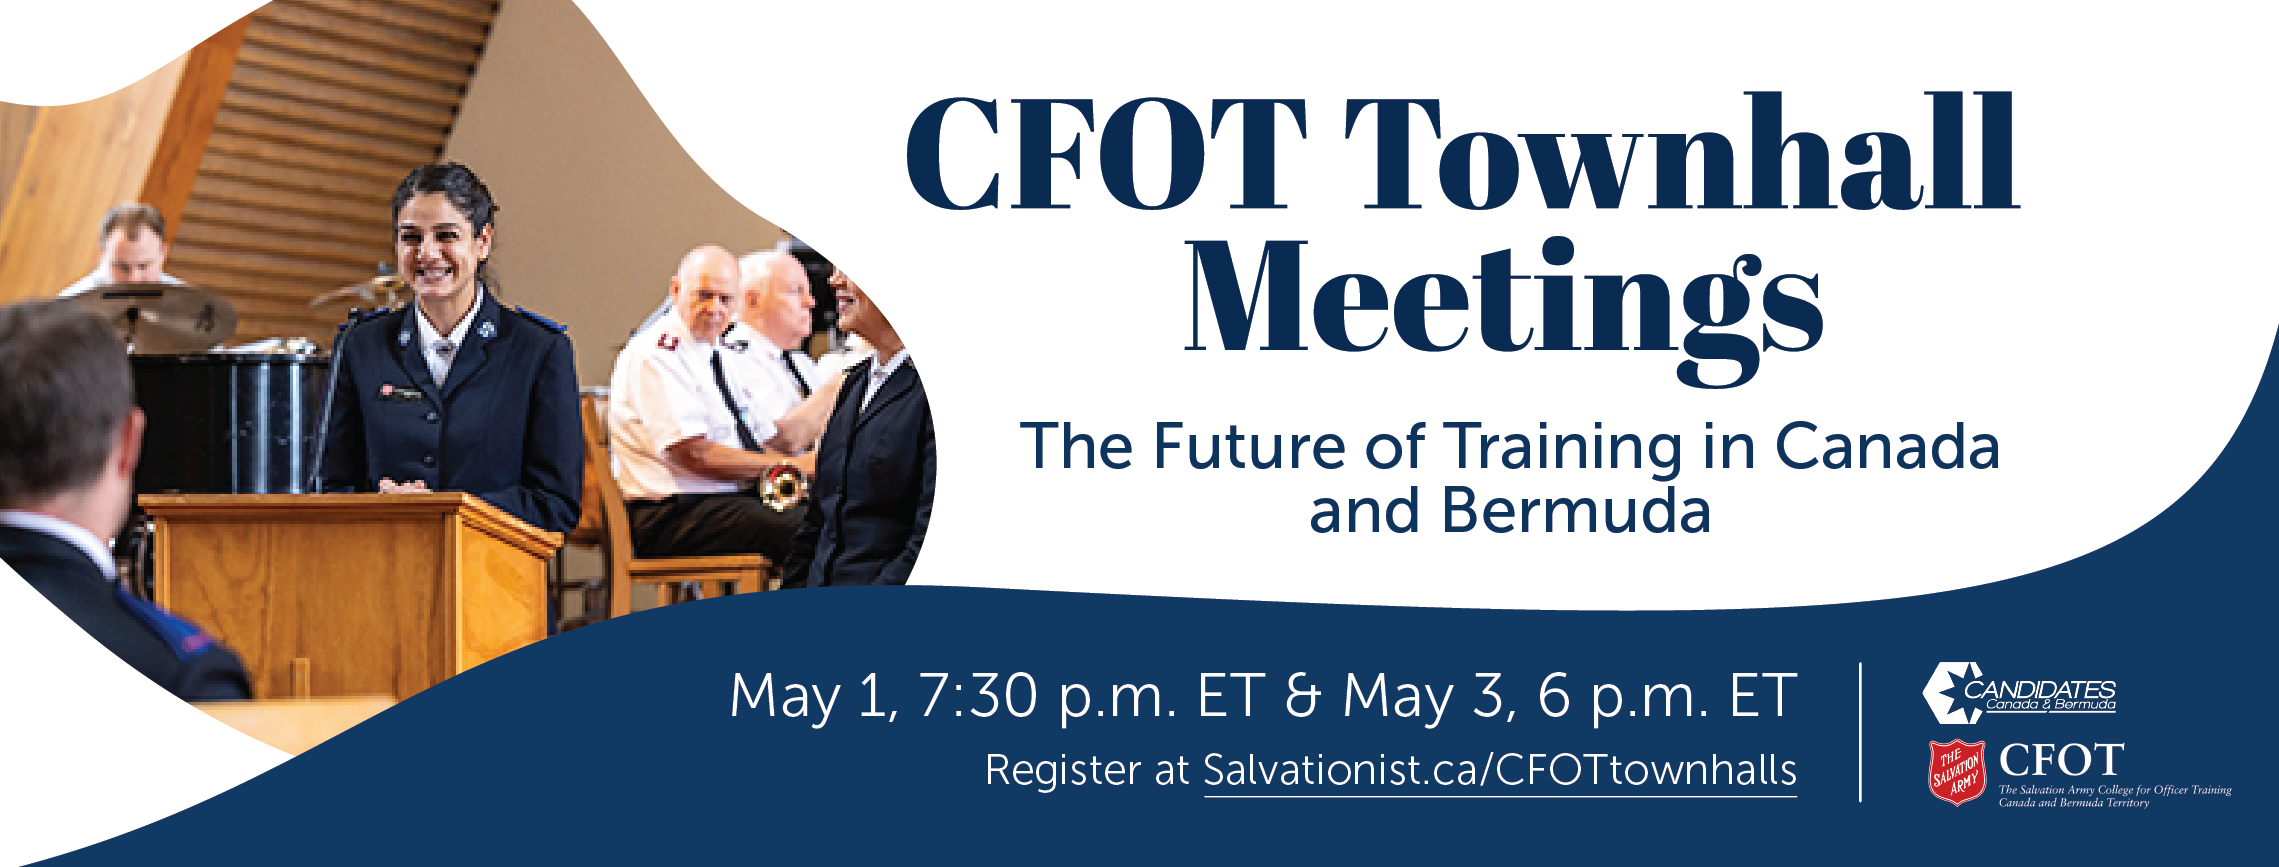 CFOT Townhall Meetings. The Future of Training in Canada and Bermuda. May 1, 7:30 p.m. ET and May 3, 6 p.m. ET. Register at Salvationist.ca/CFOTtownhalls.